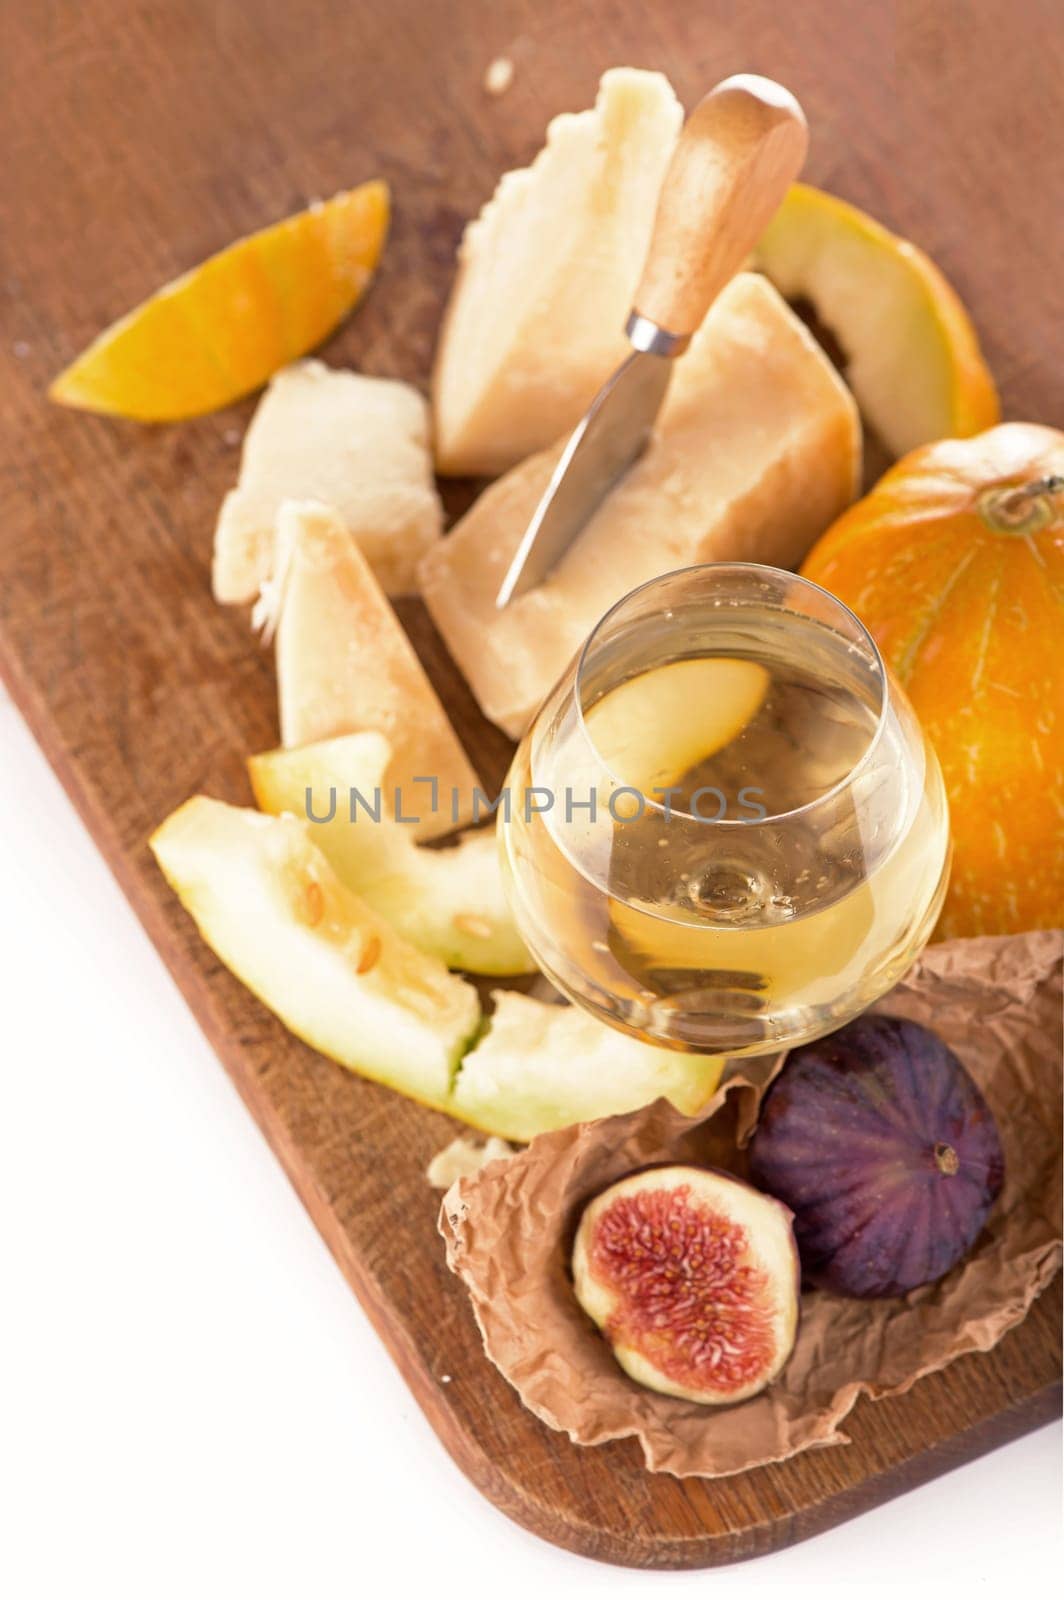 white wine, cheese, melon, grapes figs on a dark background